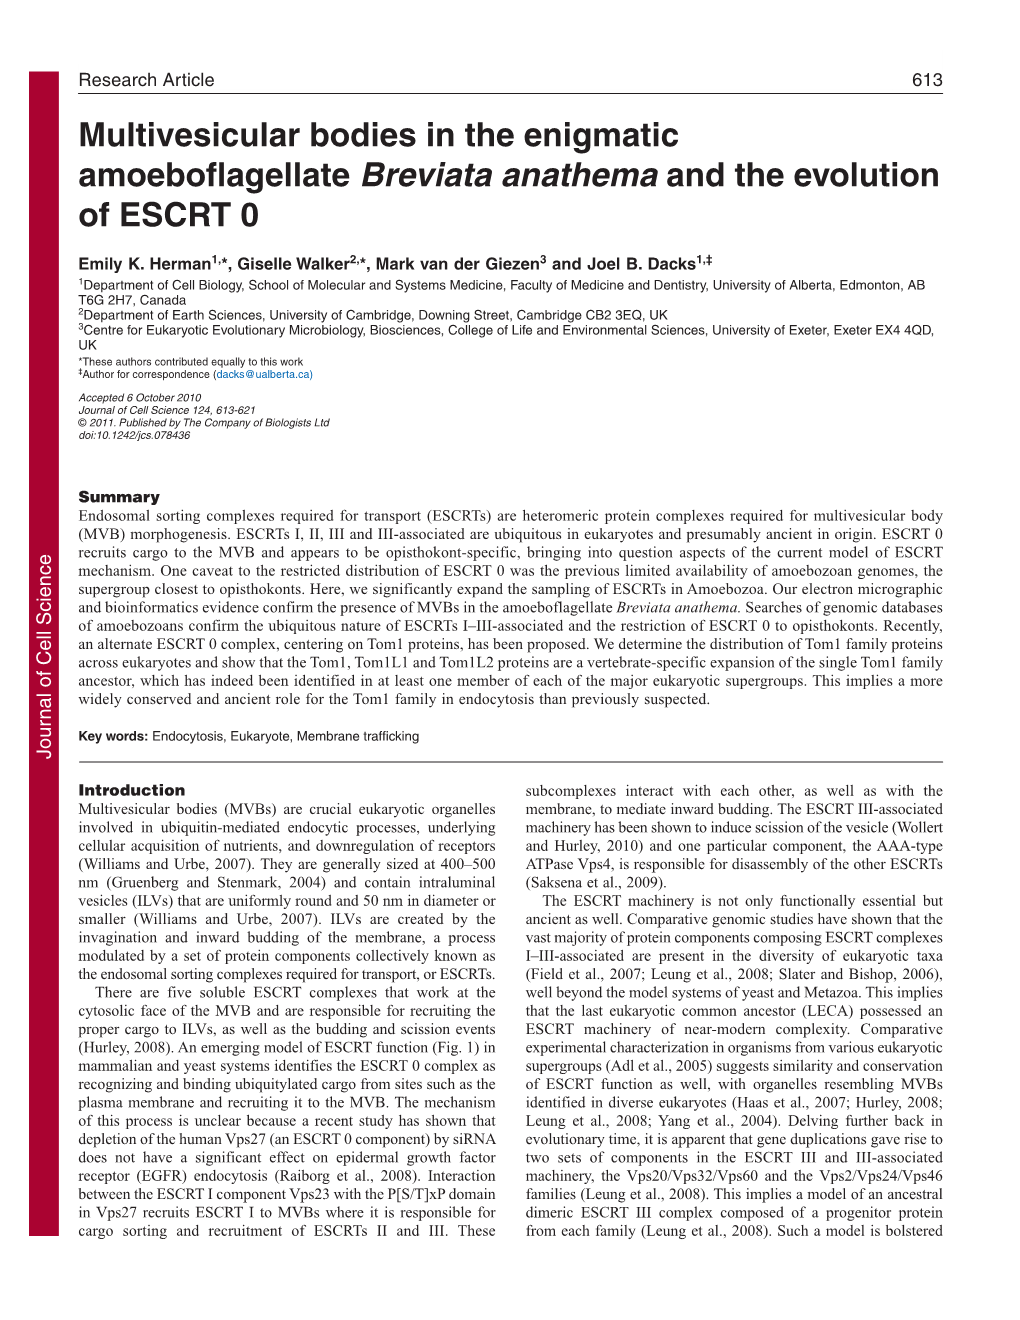 Multivesicular Bodies in the Enigmatic Amoeboflagellate Breviata Anathema and the Evolution of ESCRT 0